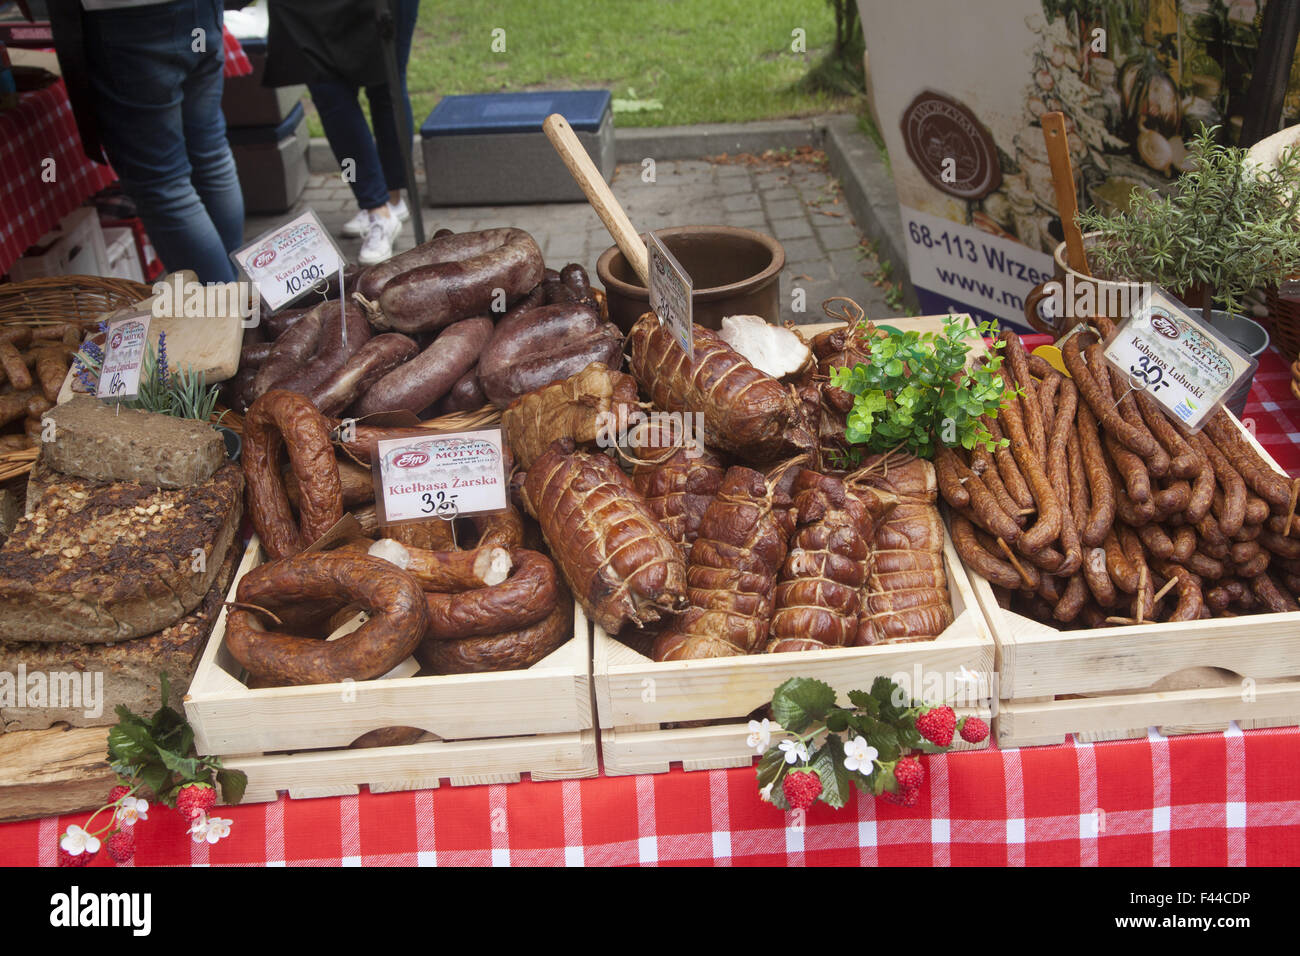 Various types of Polish sausage & hams  for sale at an outdoor festival near Zielona Gora, Ploand Stock Photo